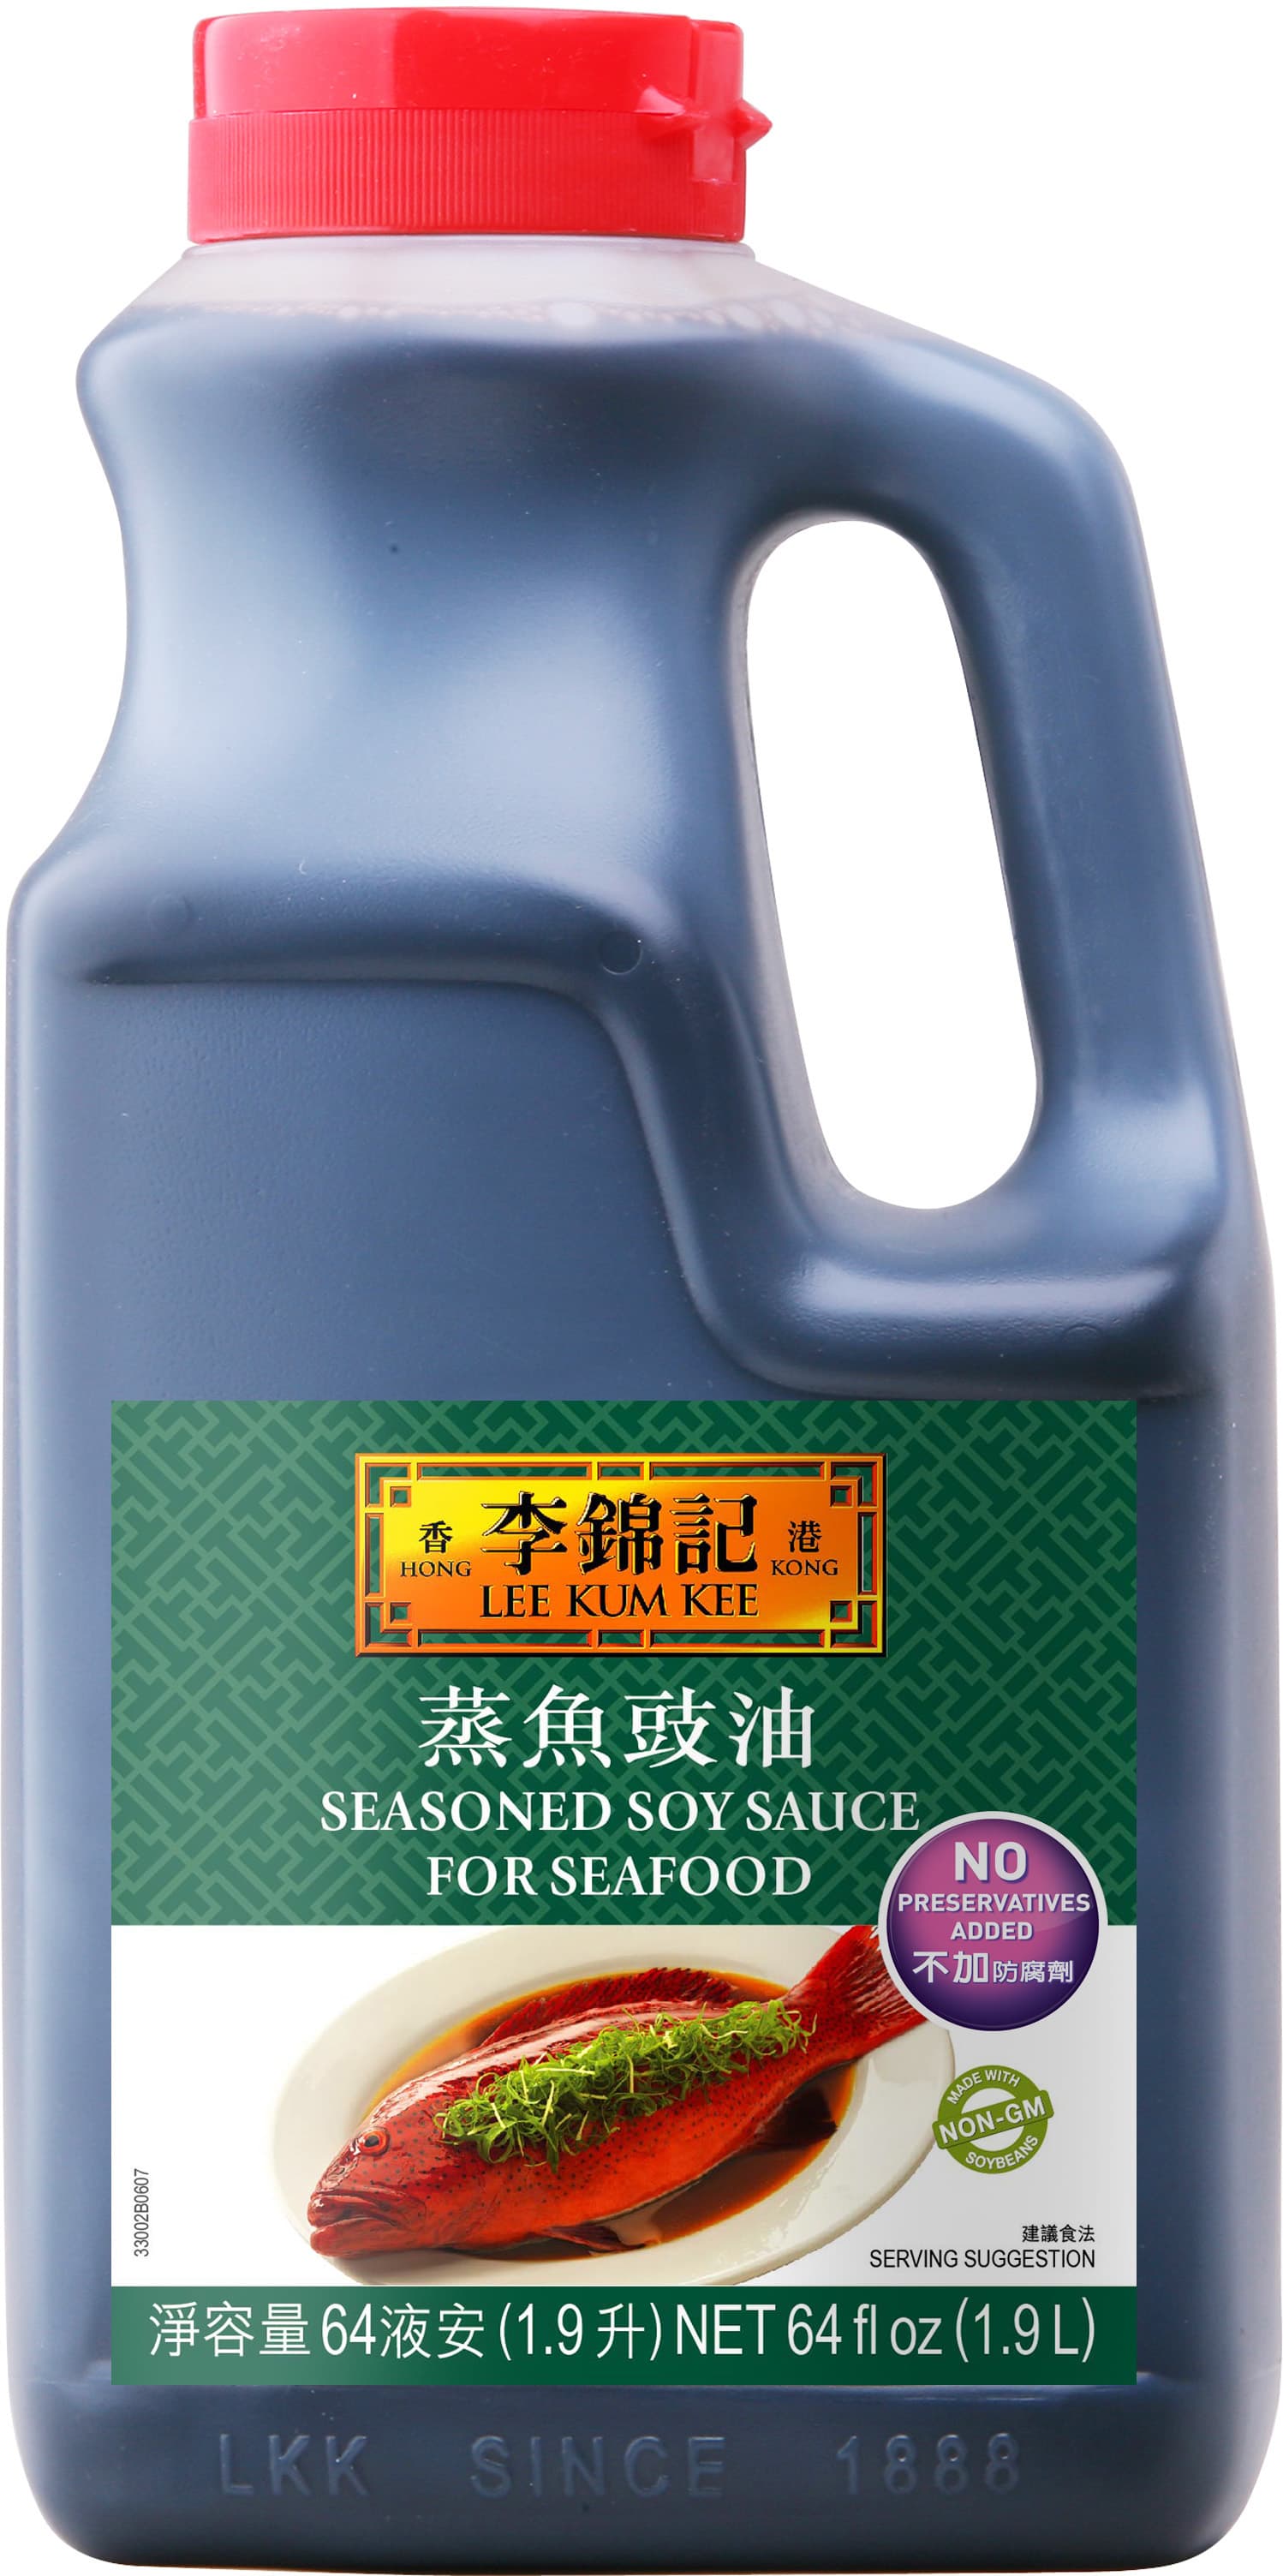 Seasoned Soy Sauce For Seafood 64oz 19L 10in